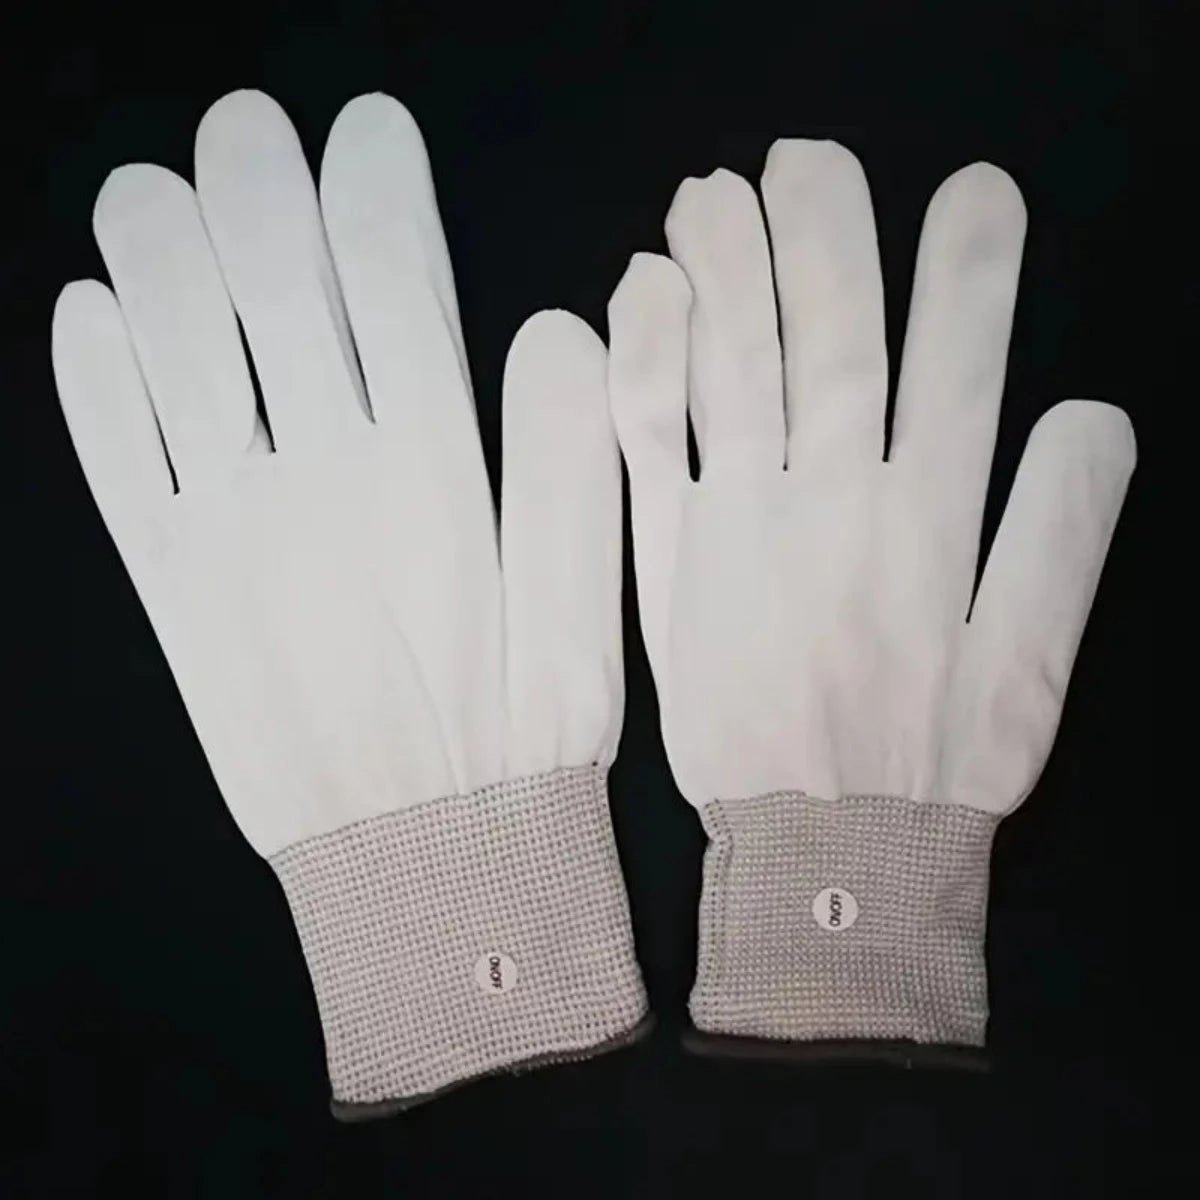 LED Light Up Gloves For Adults Toy Gifts Stocking Stuffers For Men Women In Halloween Christmas Birthday Party - worldclasscostumes